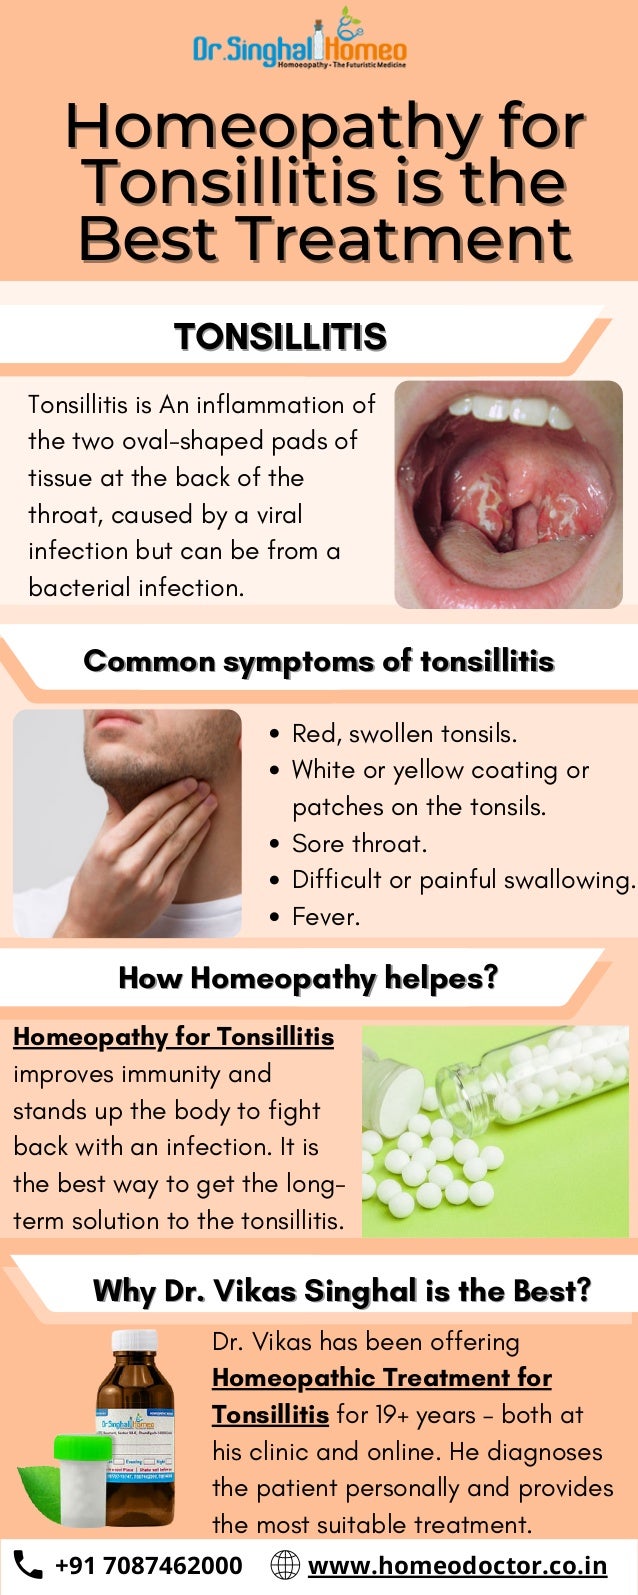 Homeopathy for tonsillitis is the best treatment